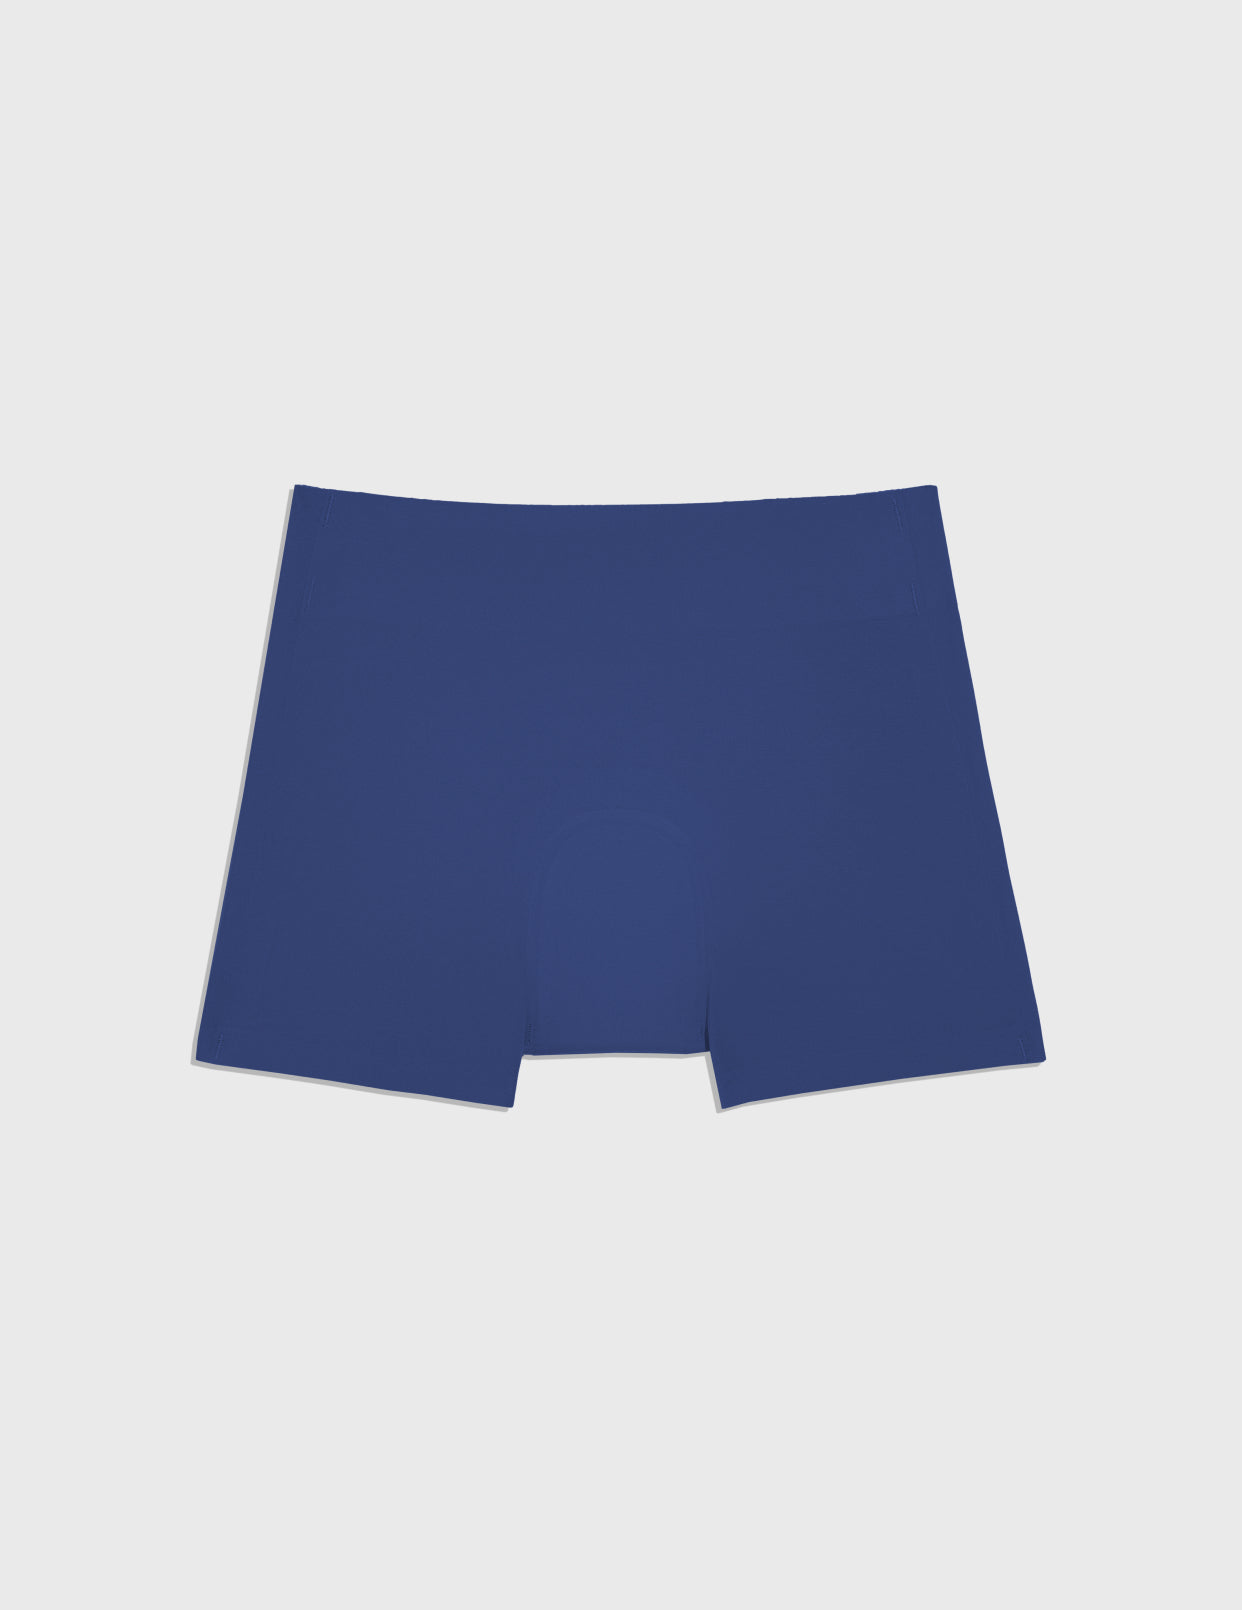 The Sleepover Short - Super Comfortable and absorbent Period Shorts